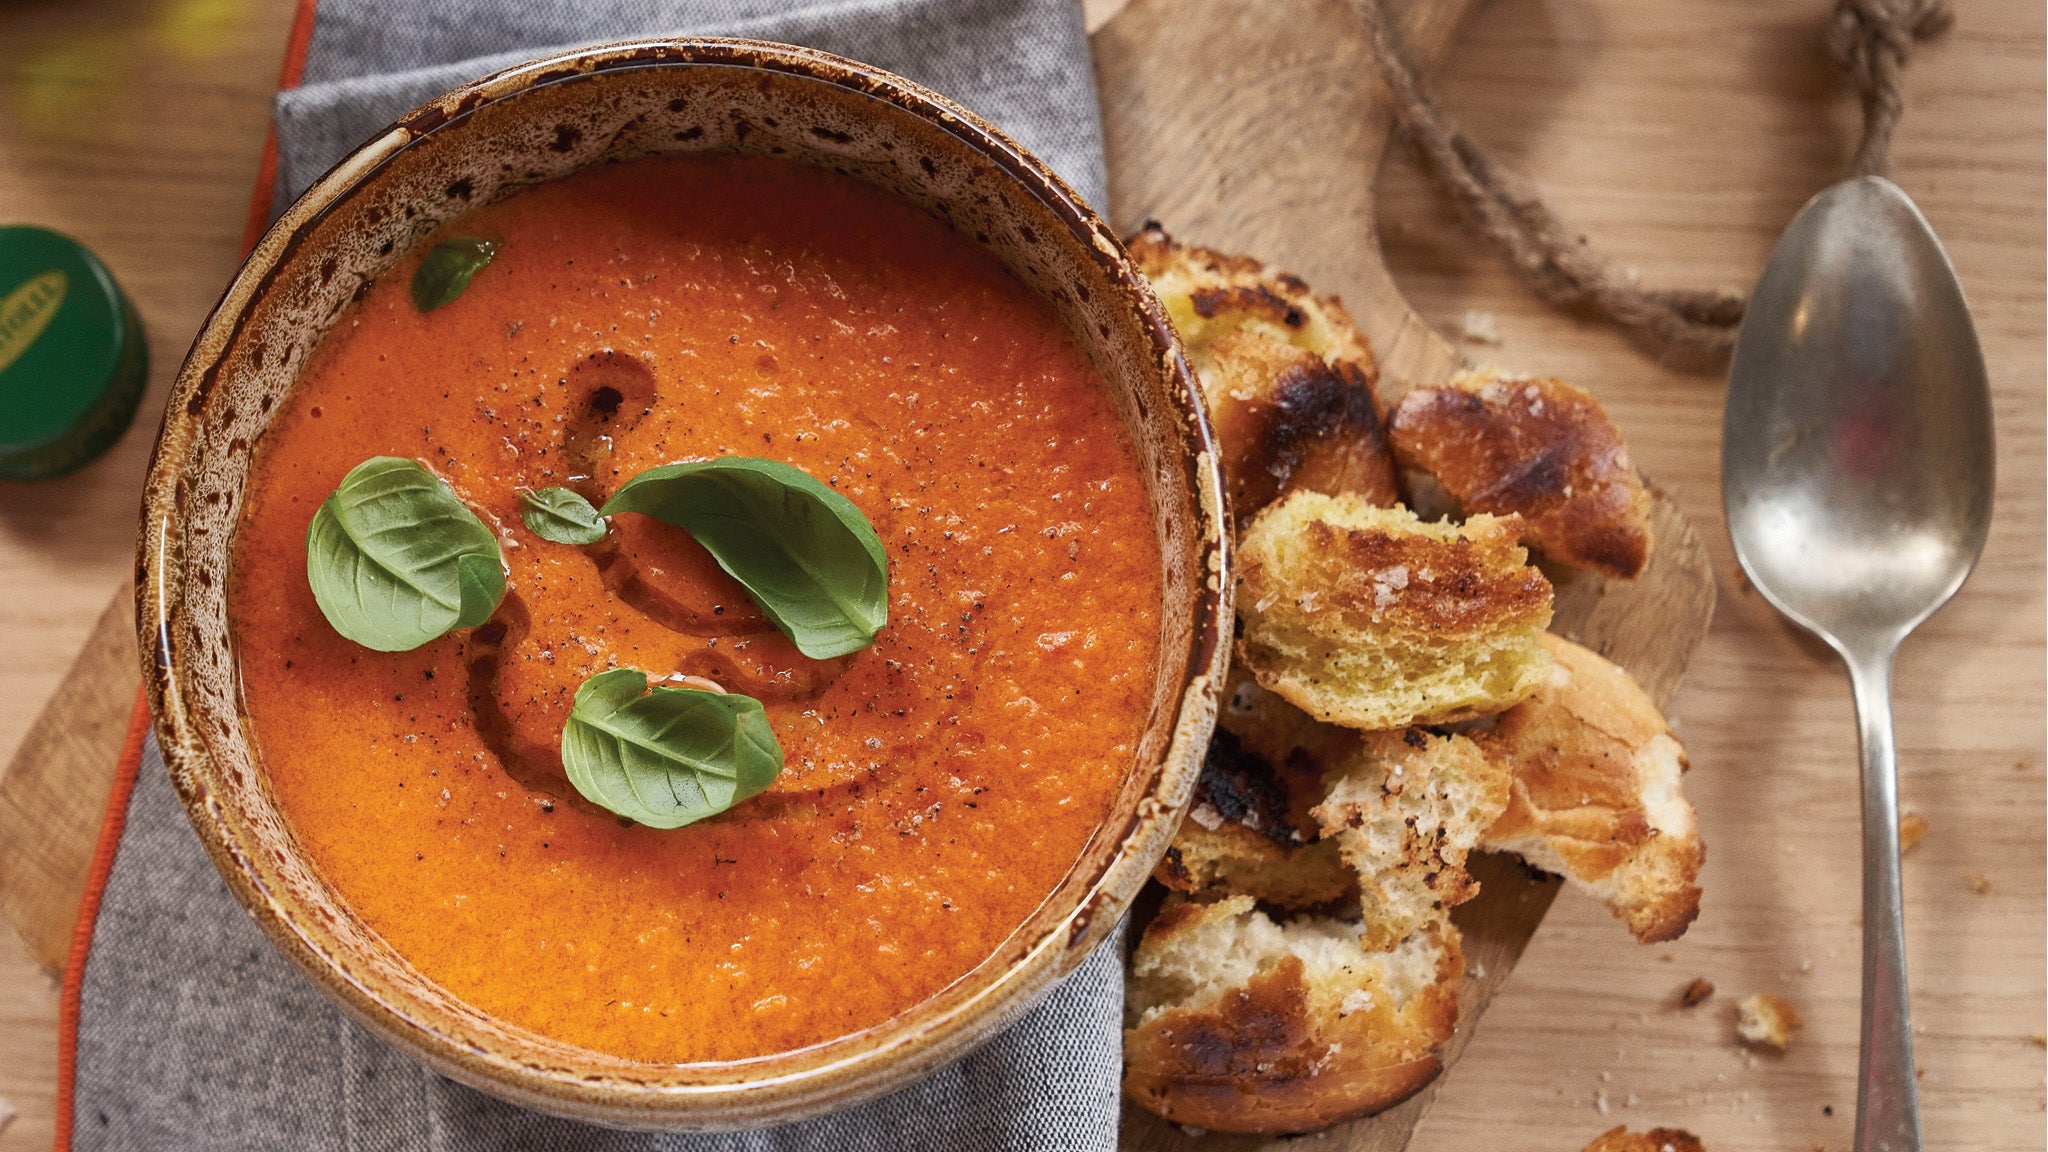 Tomato Soup with Homemade Olive Oil Croutons Recipe